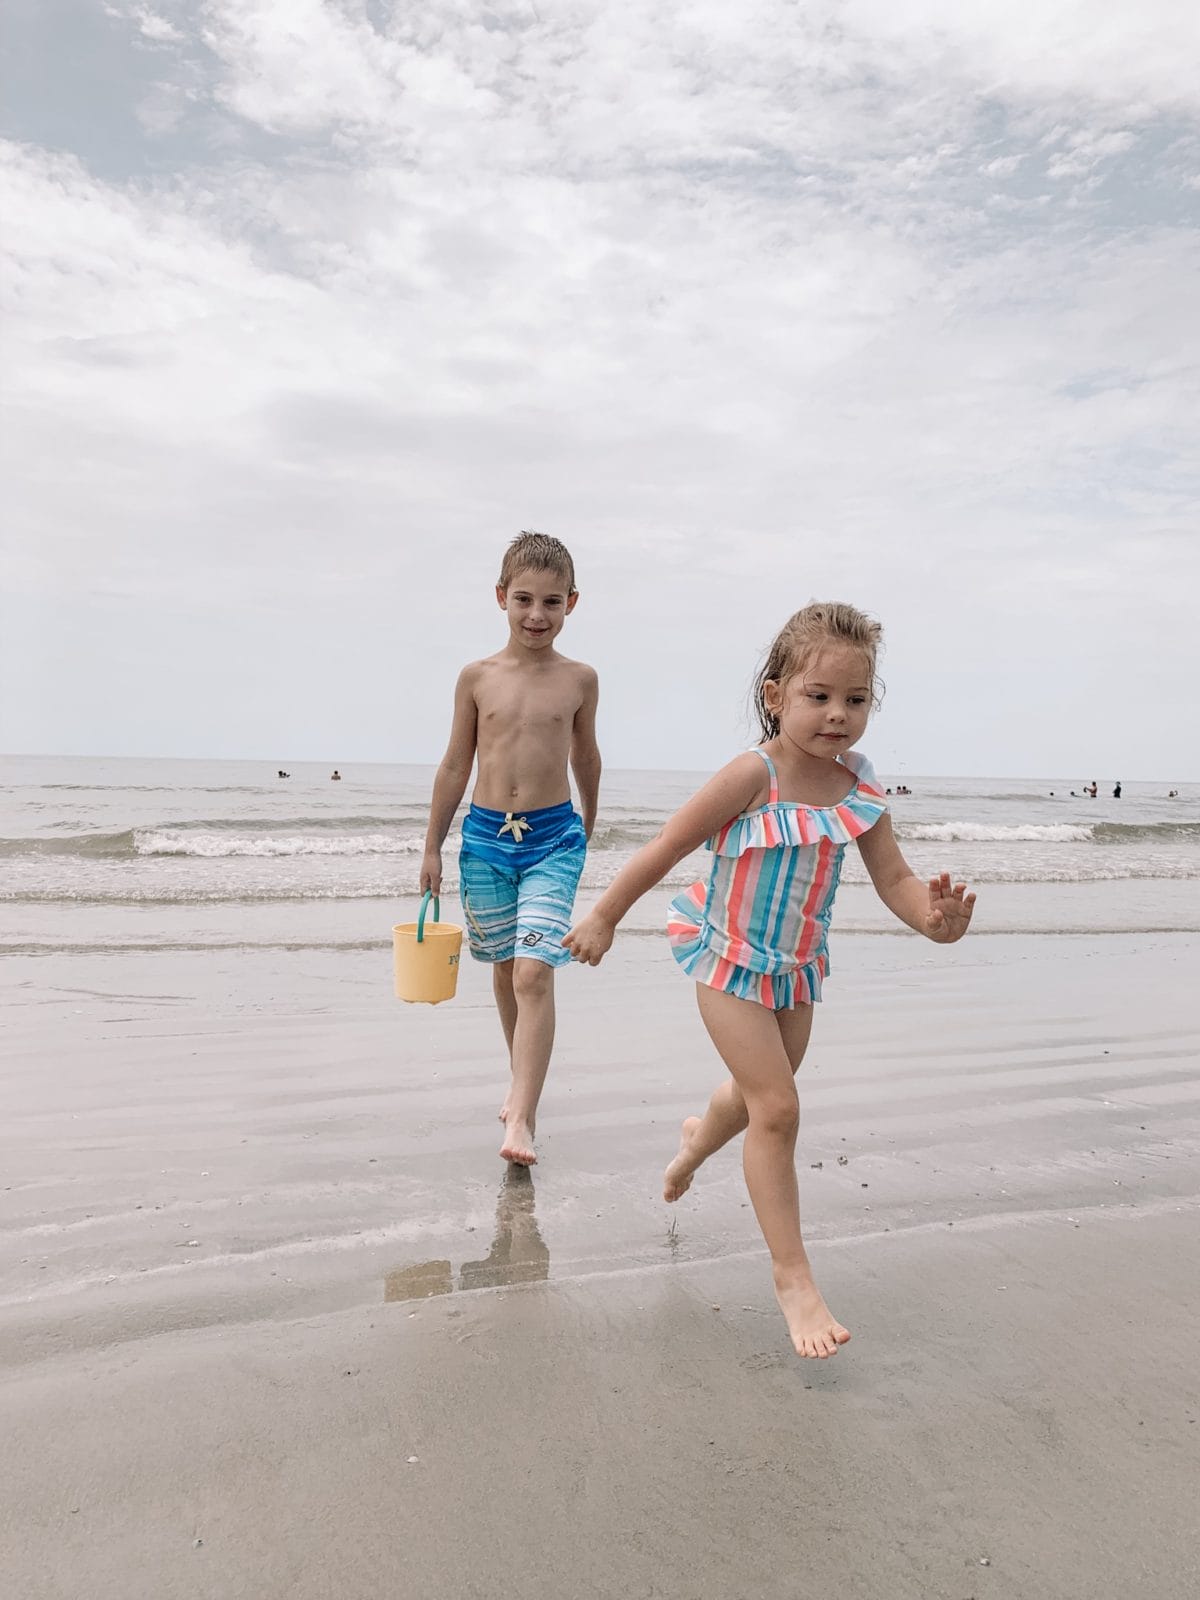 48 Hours in Galveston - siblings playing in the beach